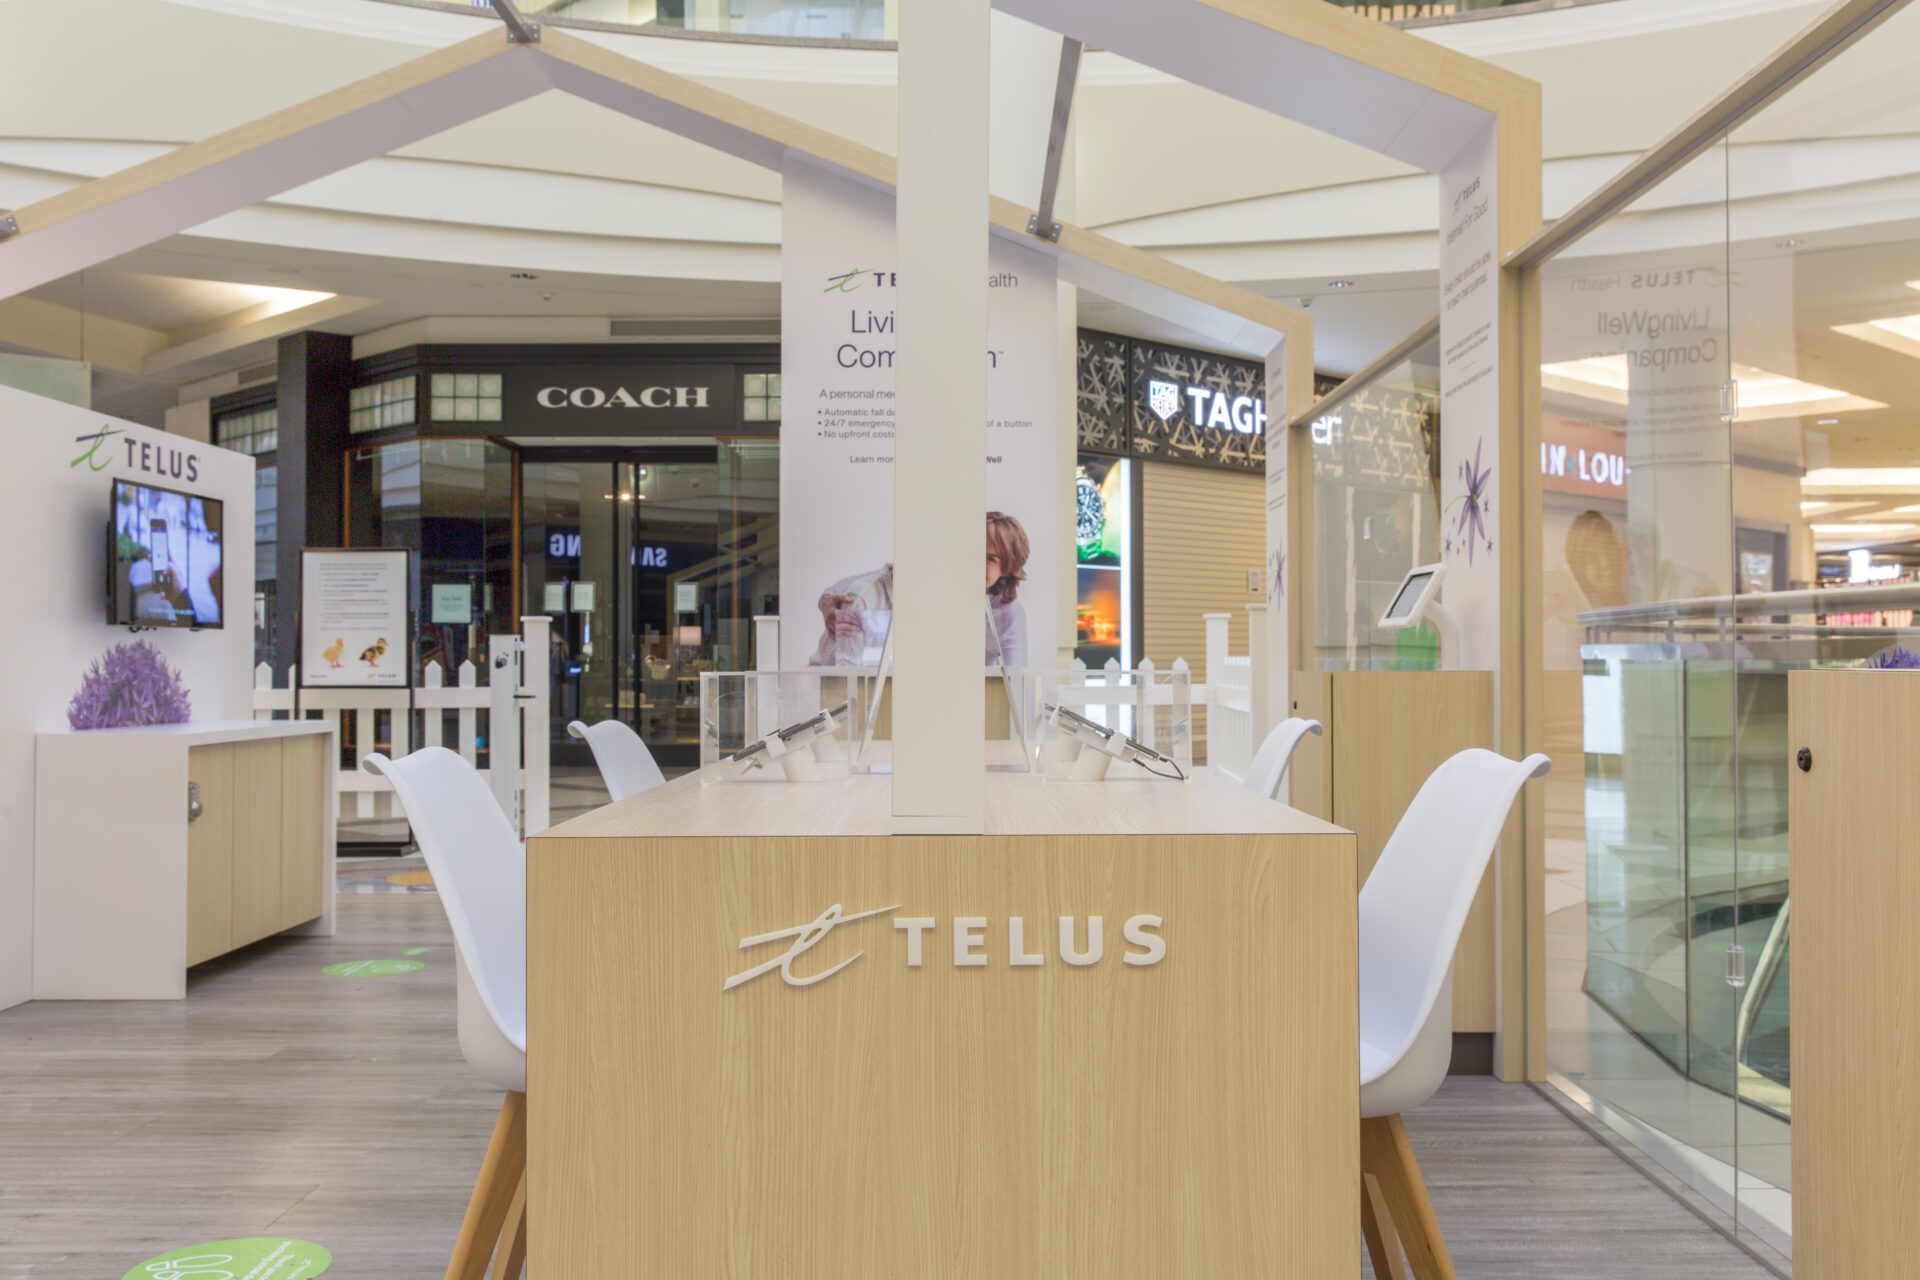 Telus wooden permanent mall display from front with focus on counter